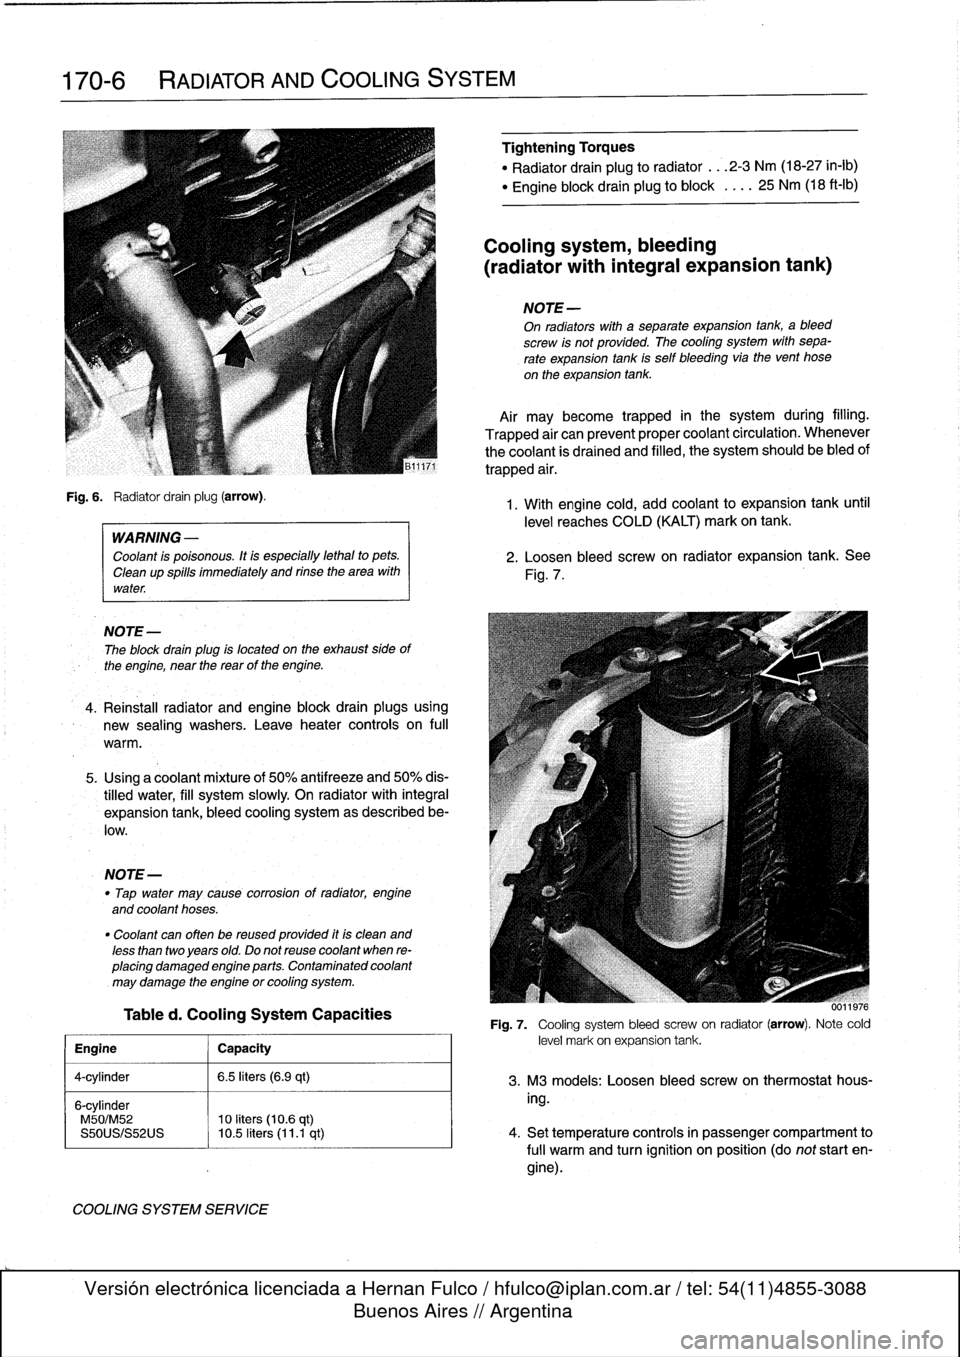 BMW 323i 1993 E36 Repair Manual 
170-6

	

RADIATOR
AND
COOLING
SYSTEM

Fig
.
6
.

	

Radiator
drain
plug
(arrow)
.

WARNING
-

Coolant
is
poisonous
.
Itis
especially
lethal
to
pets
.

Cleanup
spills
immediately
and
rinse
the
area
w